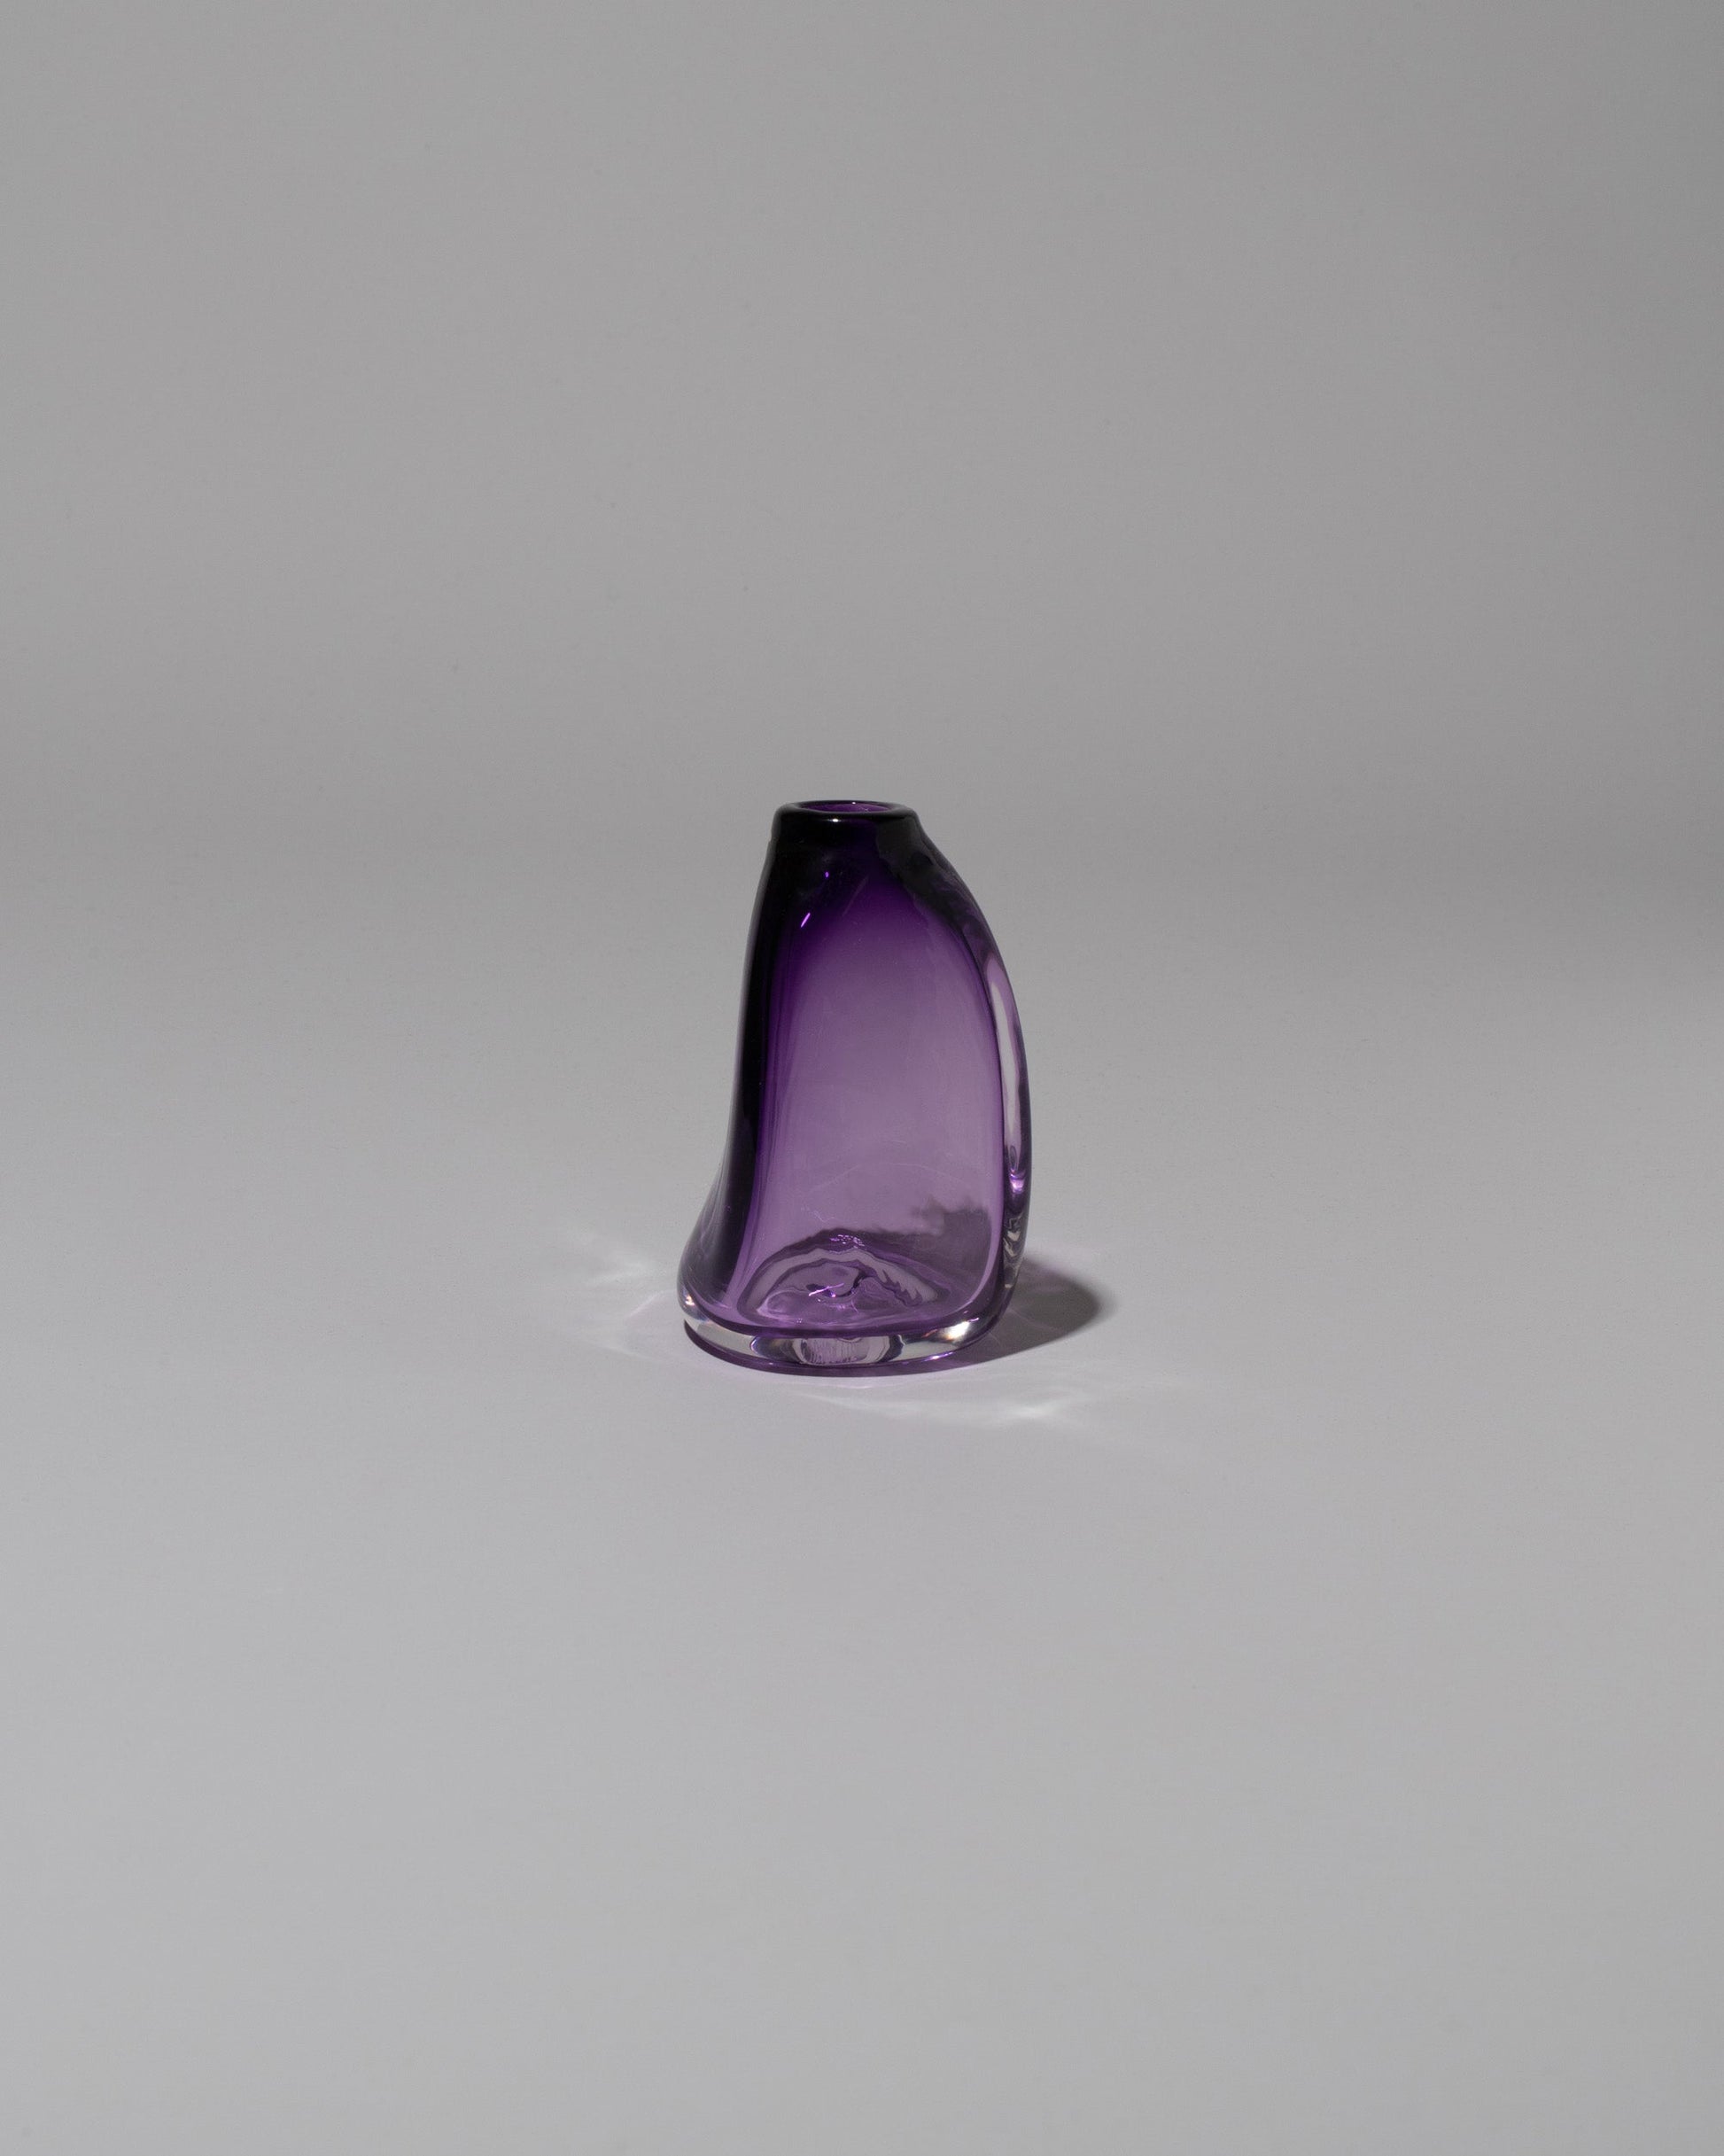 BaleFire Glass Small Amethyst Suspension Vase on light color background.